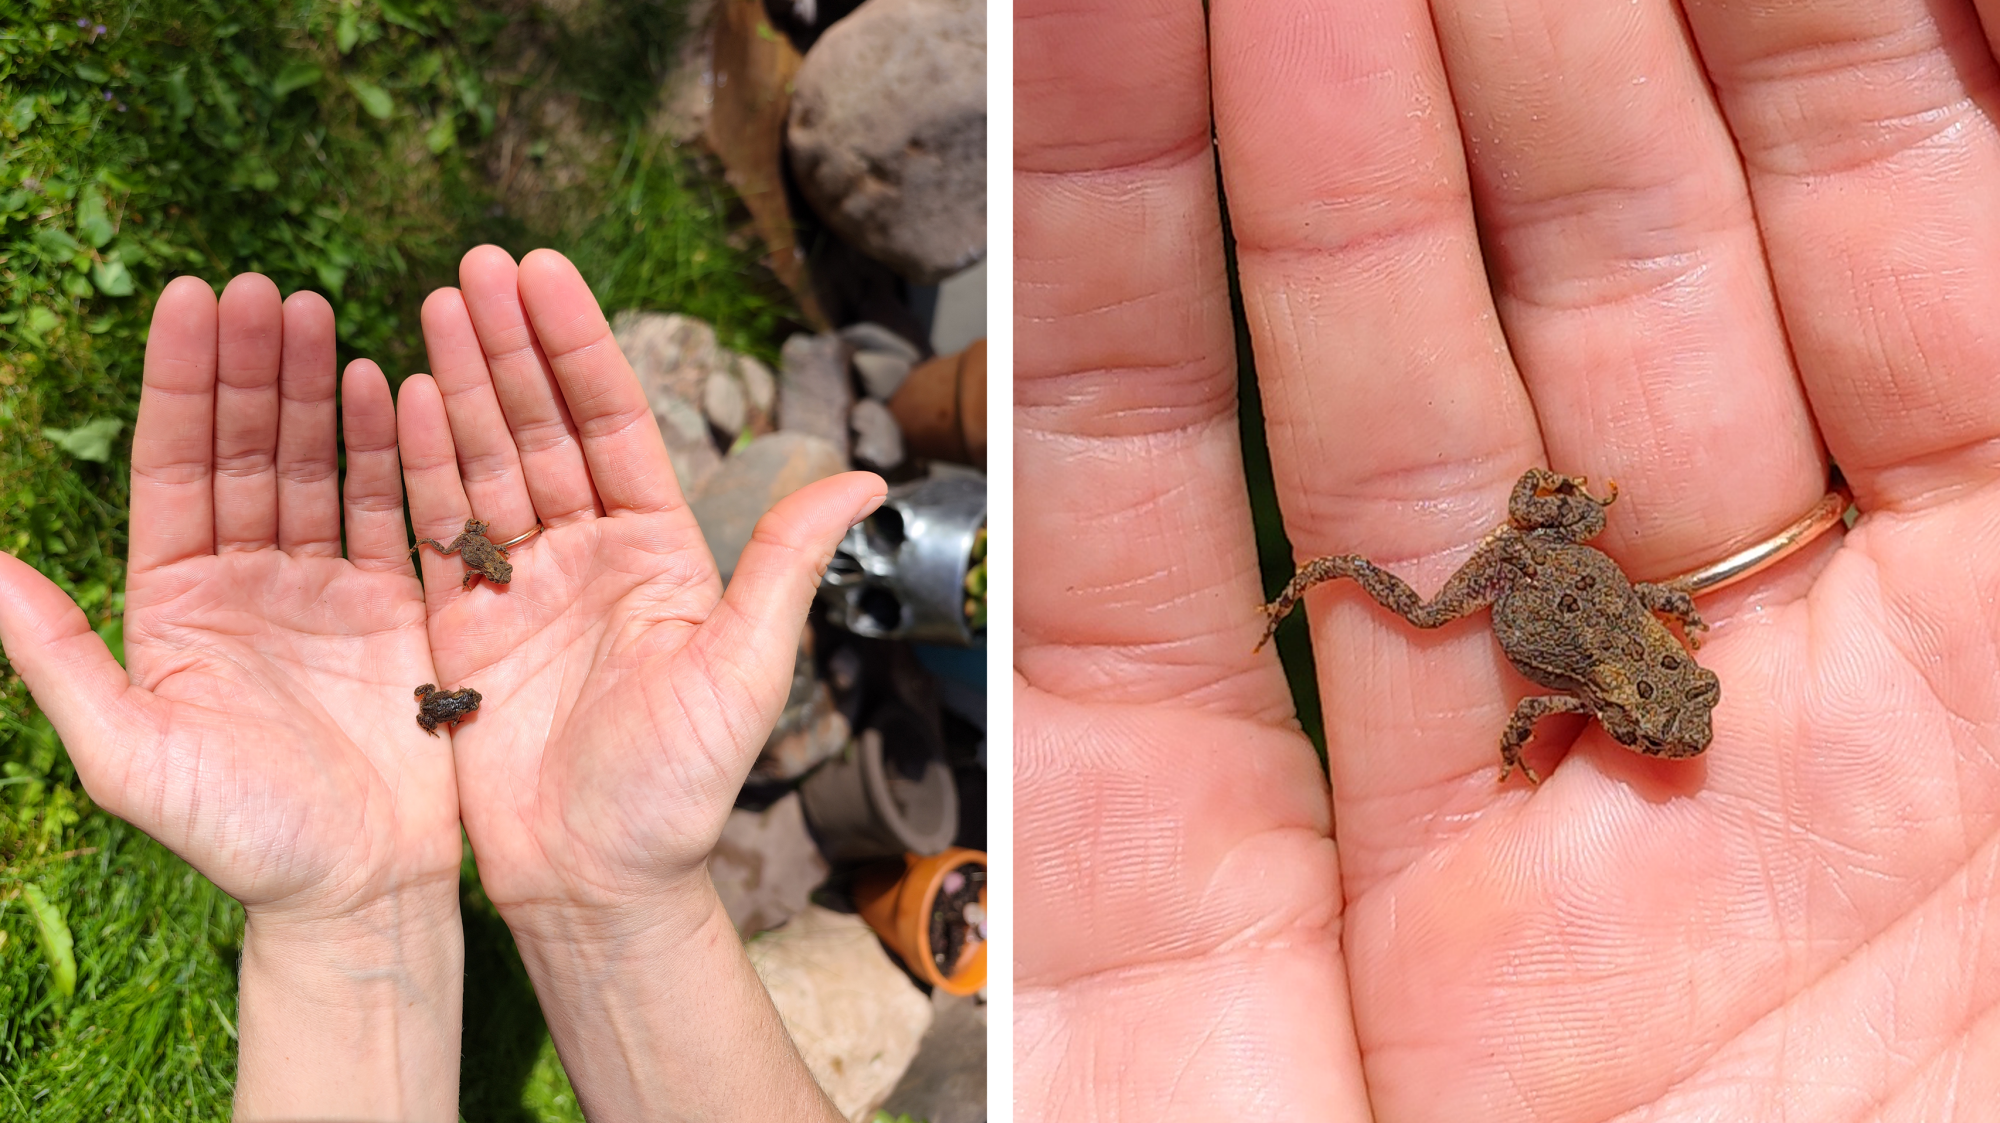 Left: Hands palm up holding two tiny frogs. Right: Close up of frog in the image on the left 